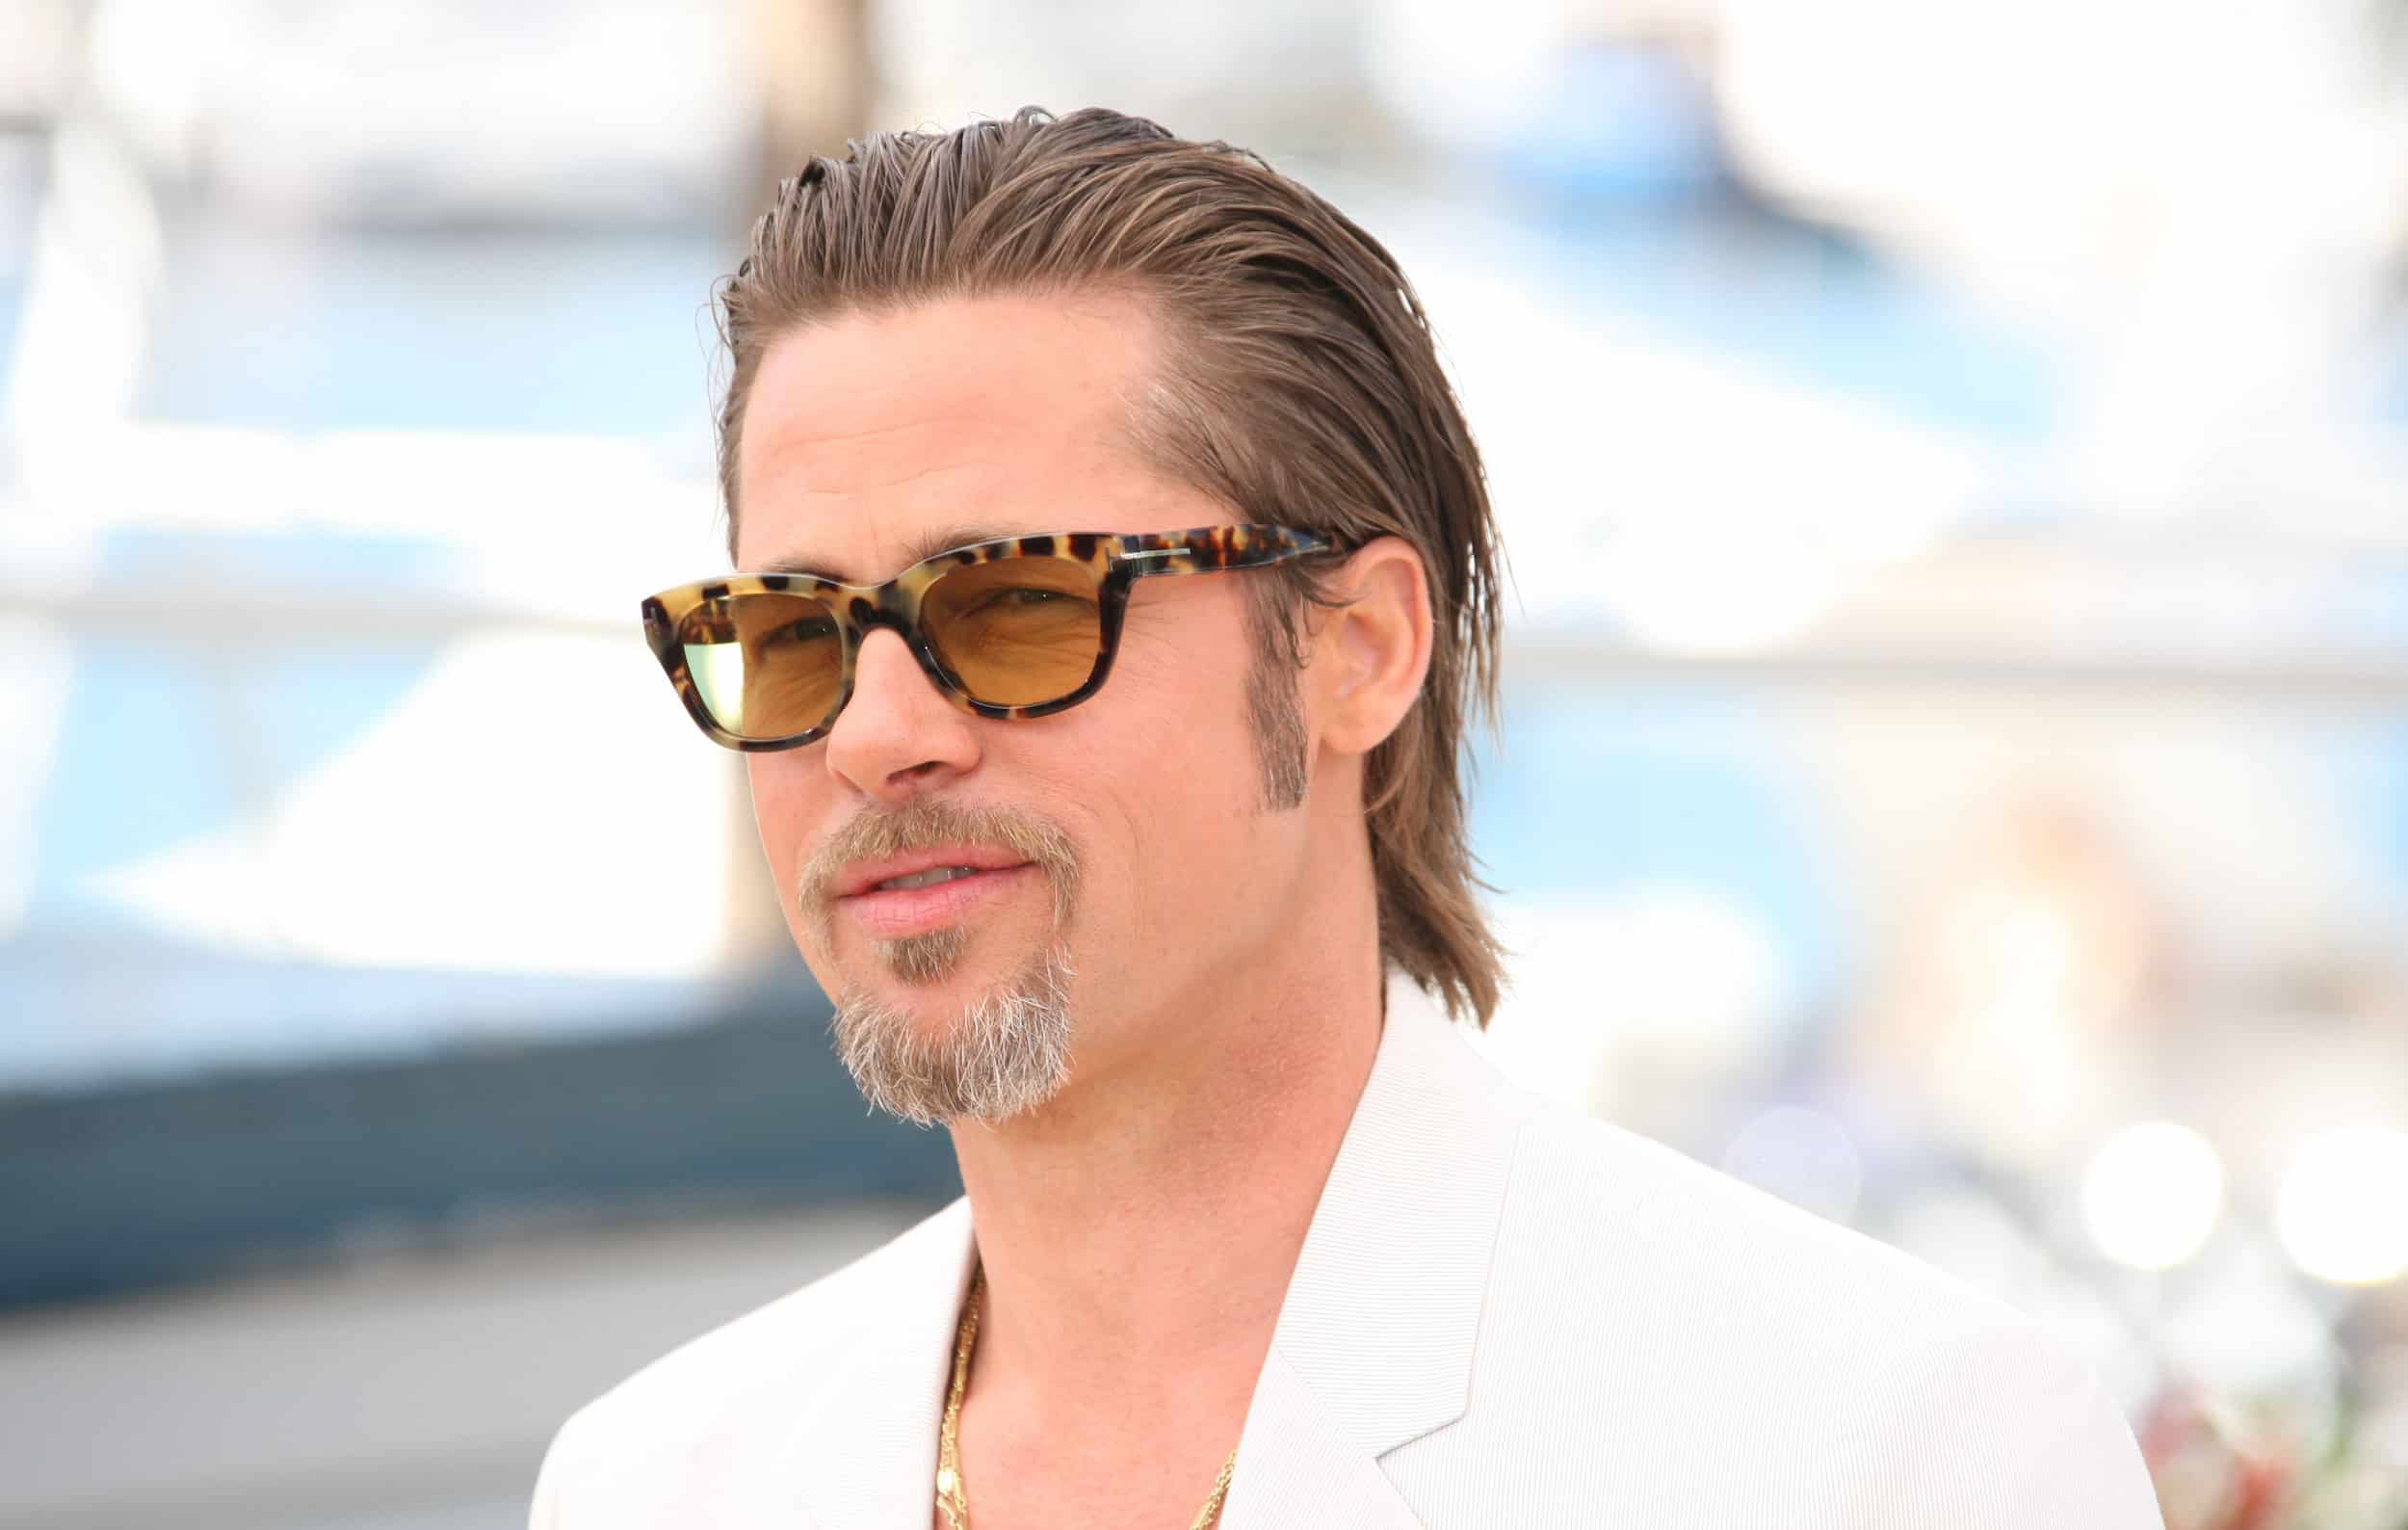 What Cologne Does Brad Pitt Wear?